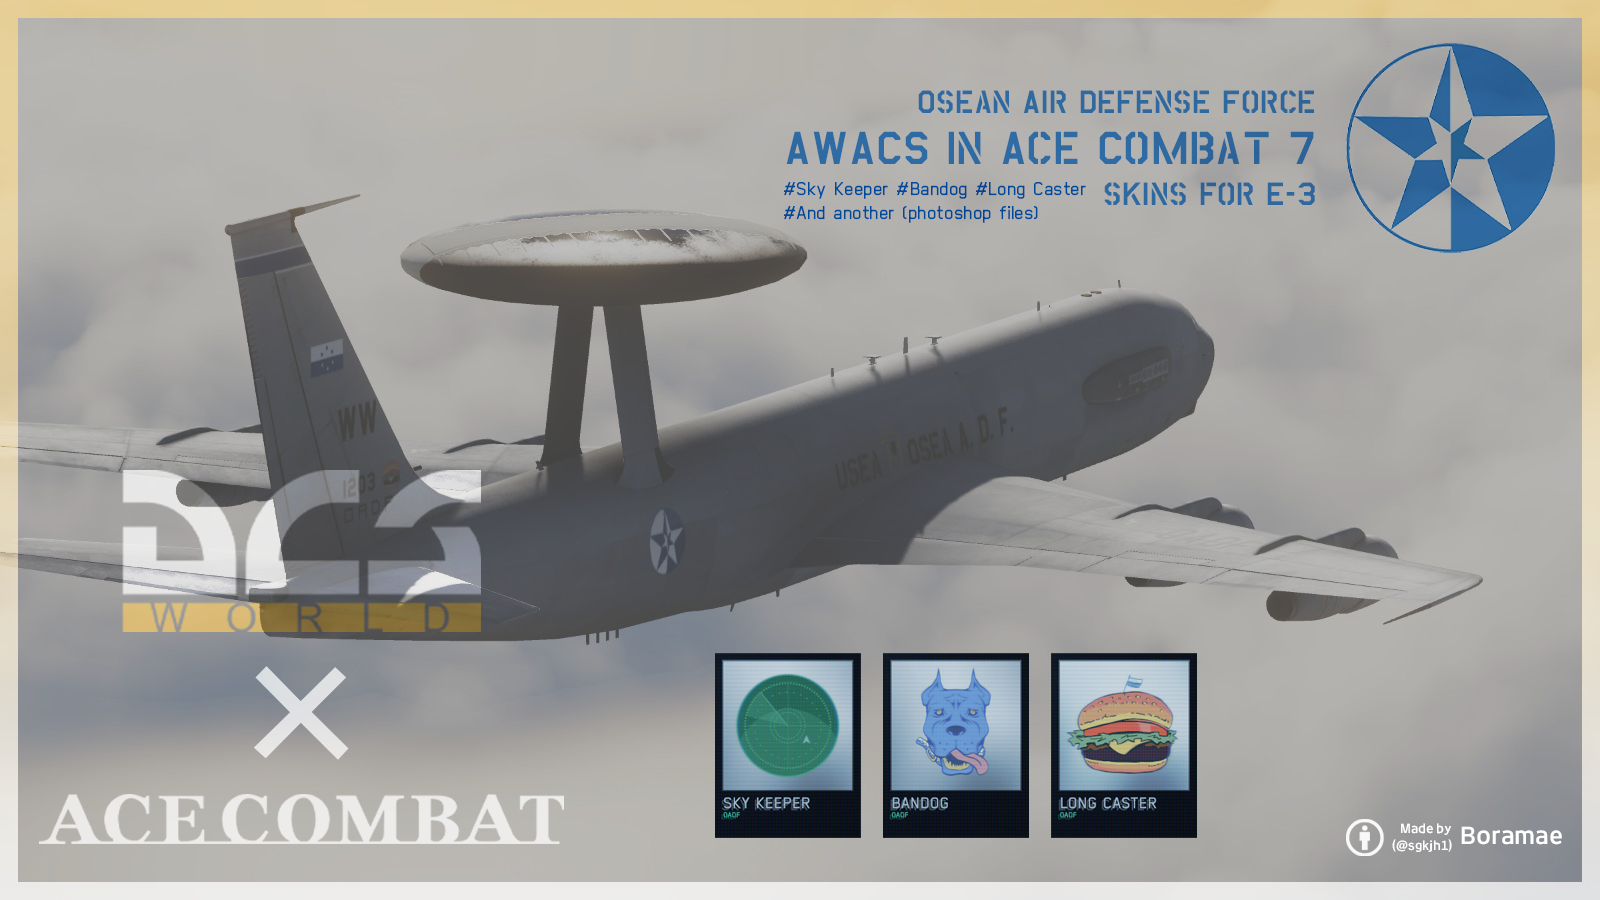 Ace Combat - Osean Air Defence Force AWACS Skins for E-3 (Fan-made)